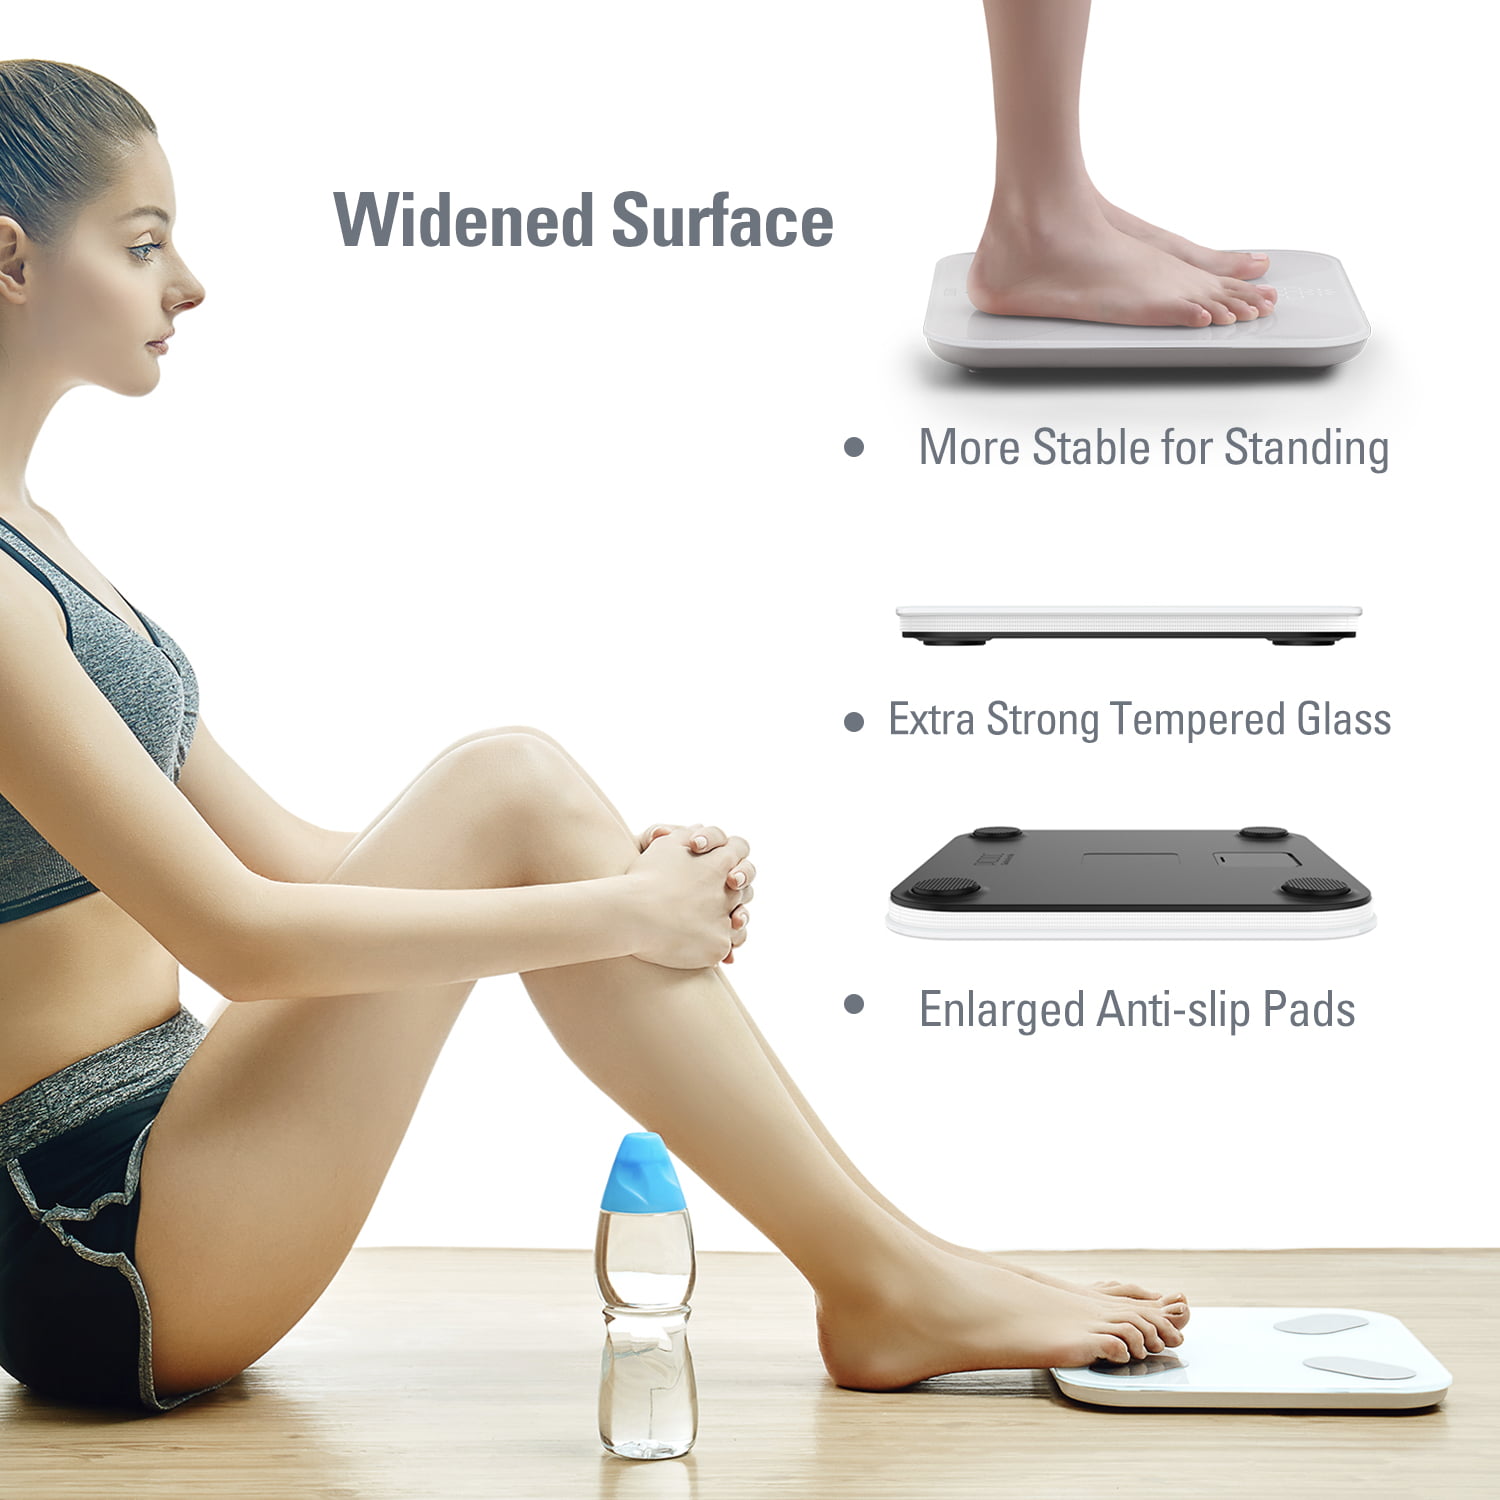 PICOOC Scale for Body Weight - Bluetooth Smart Digital Body Fat Scale